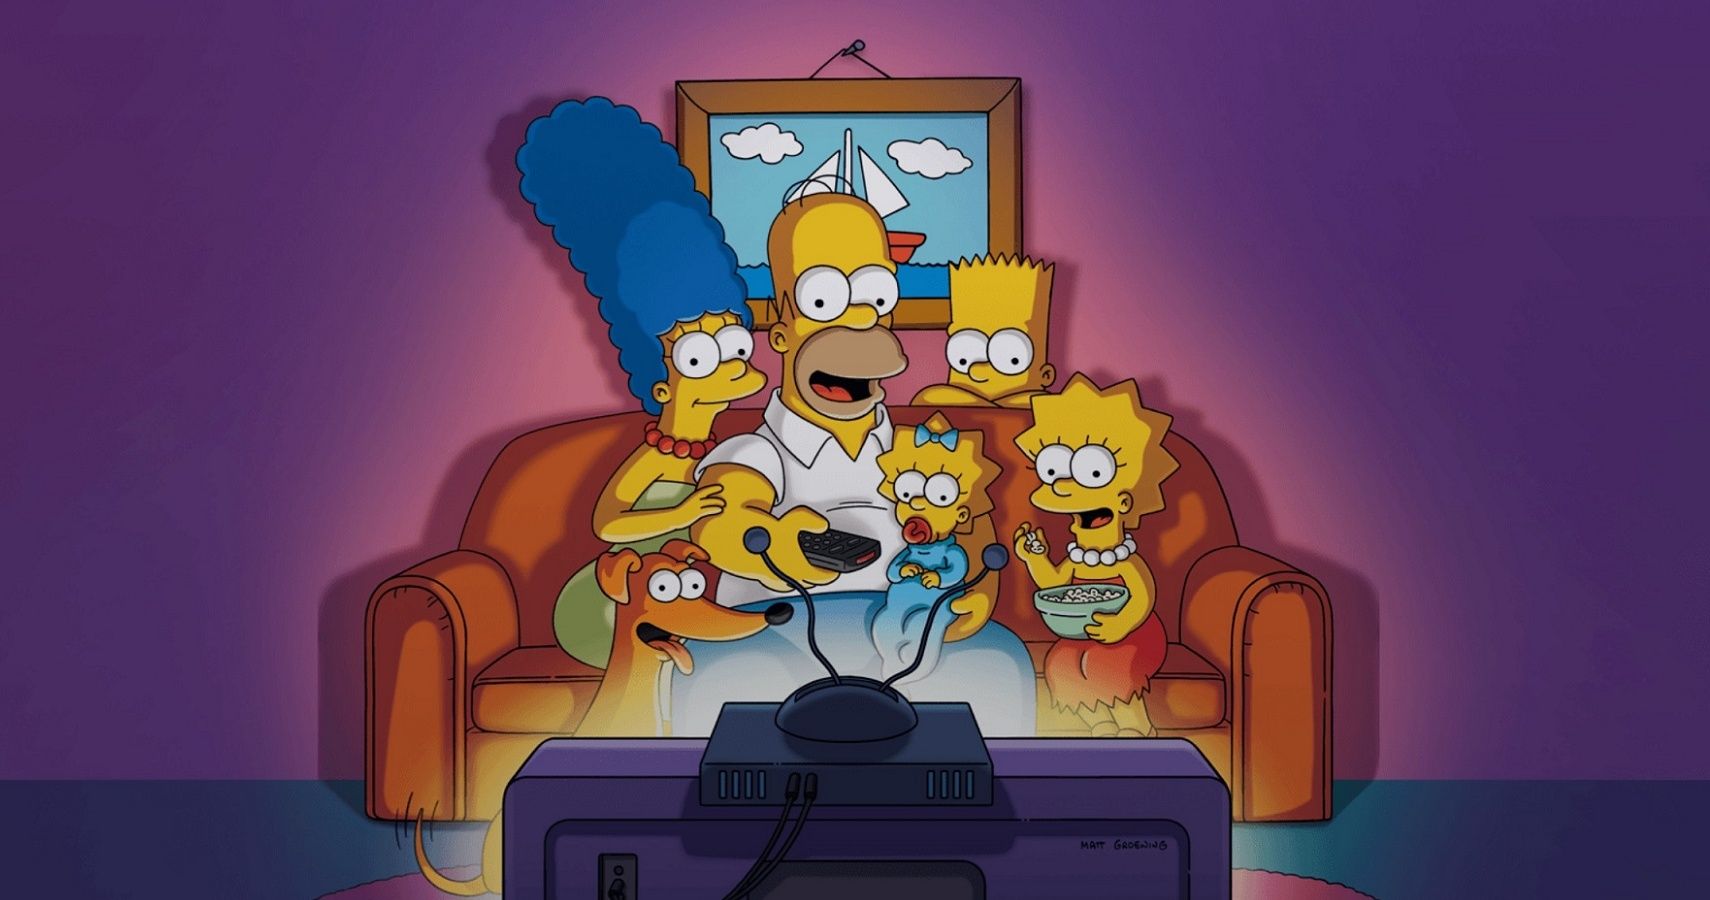 10 Behind The Scenes Facts About The Simpsons